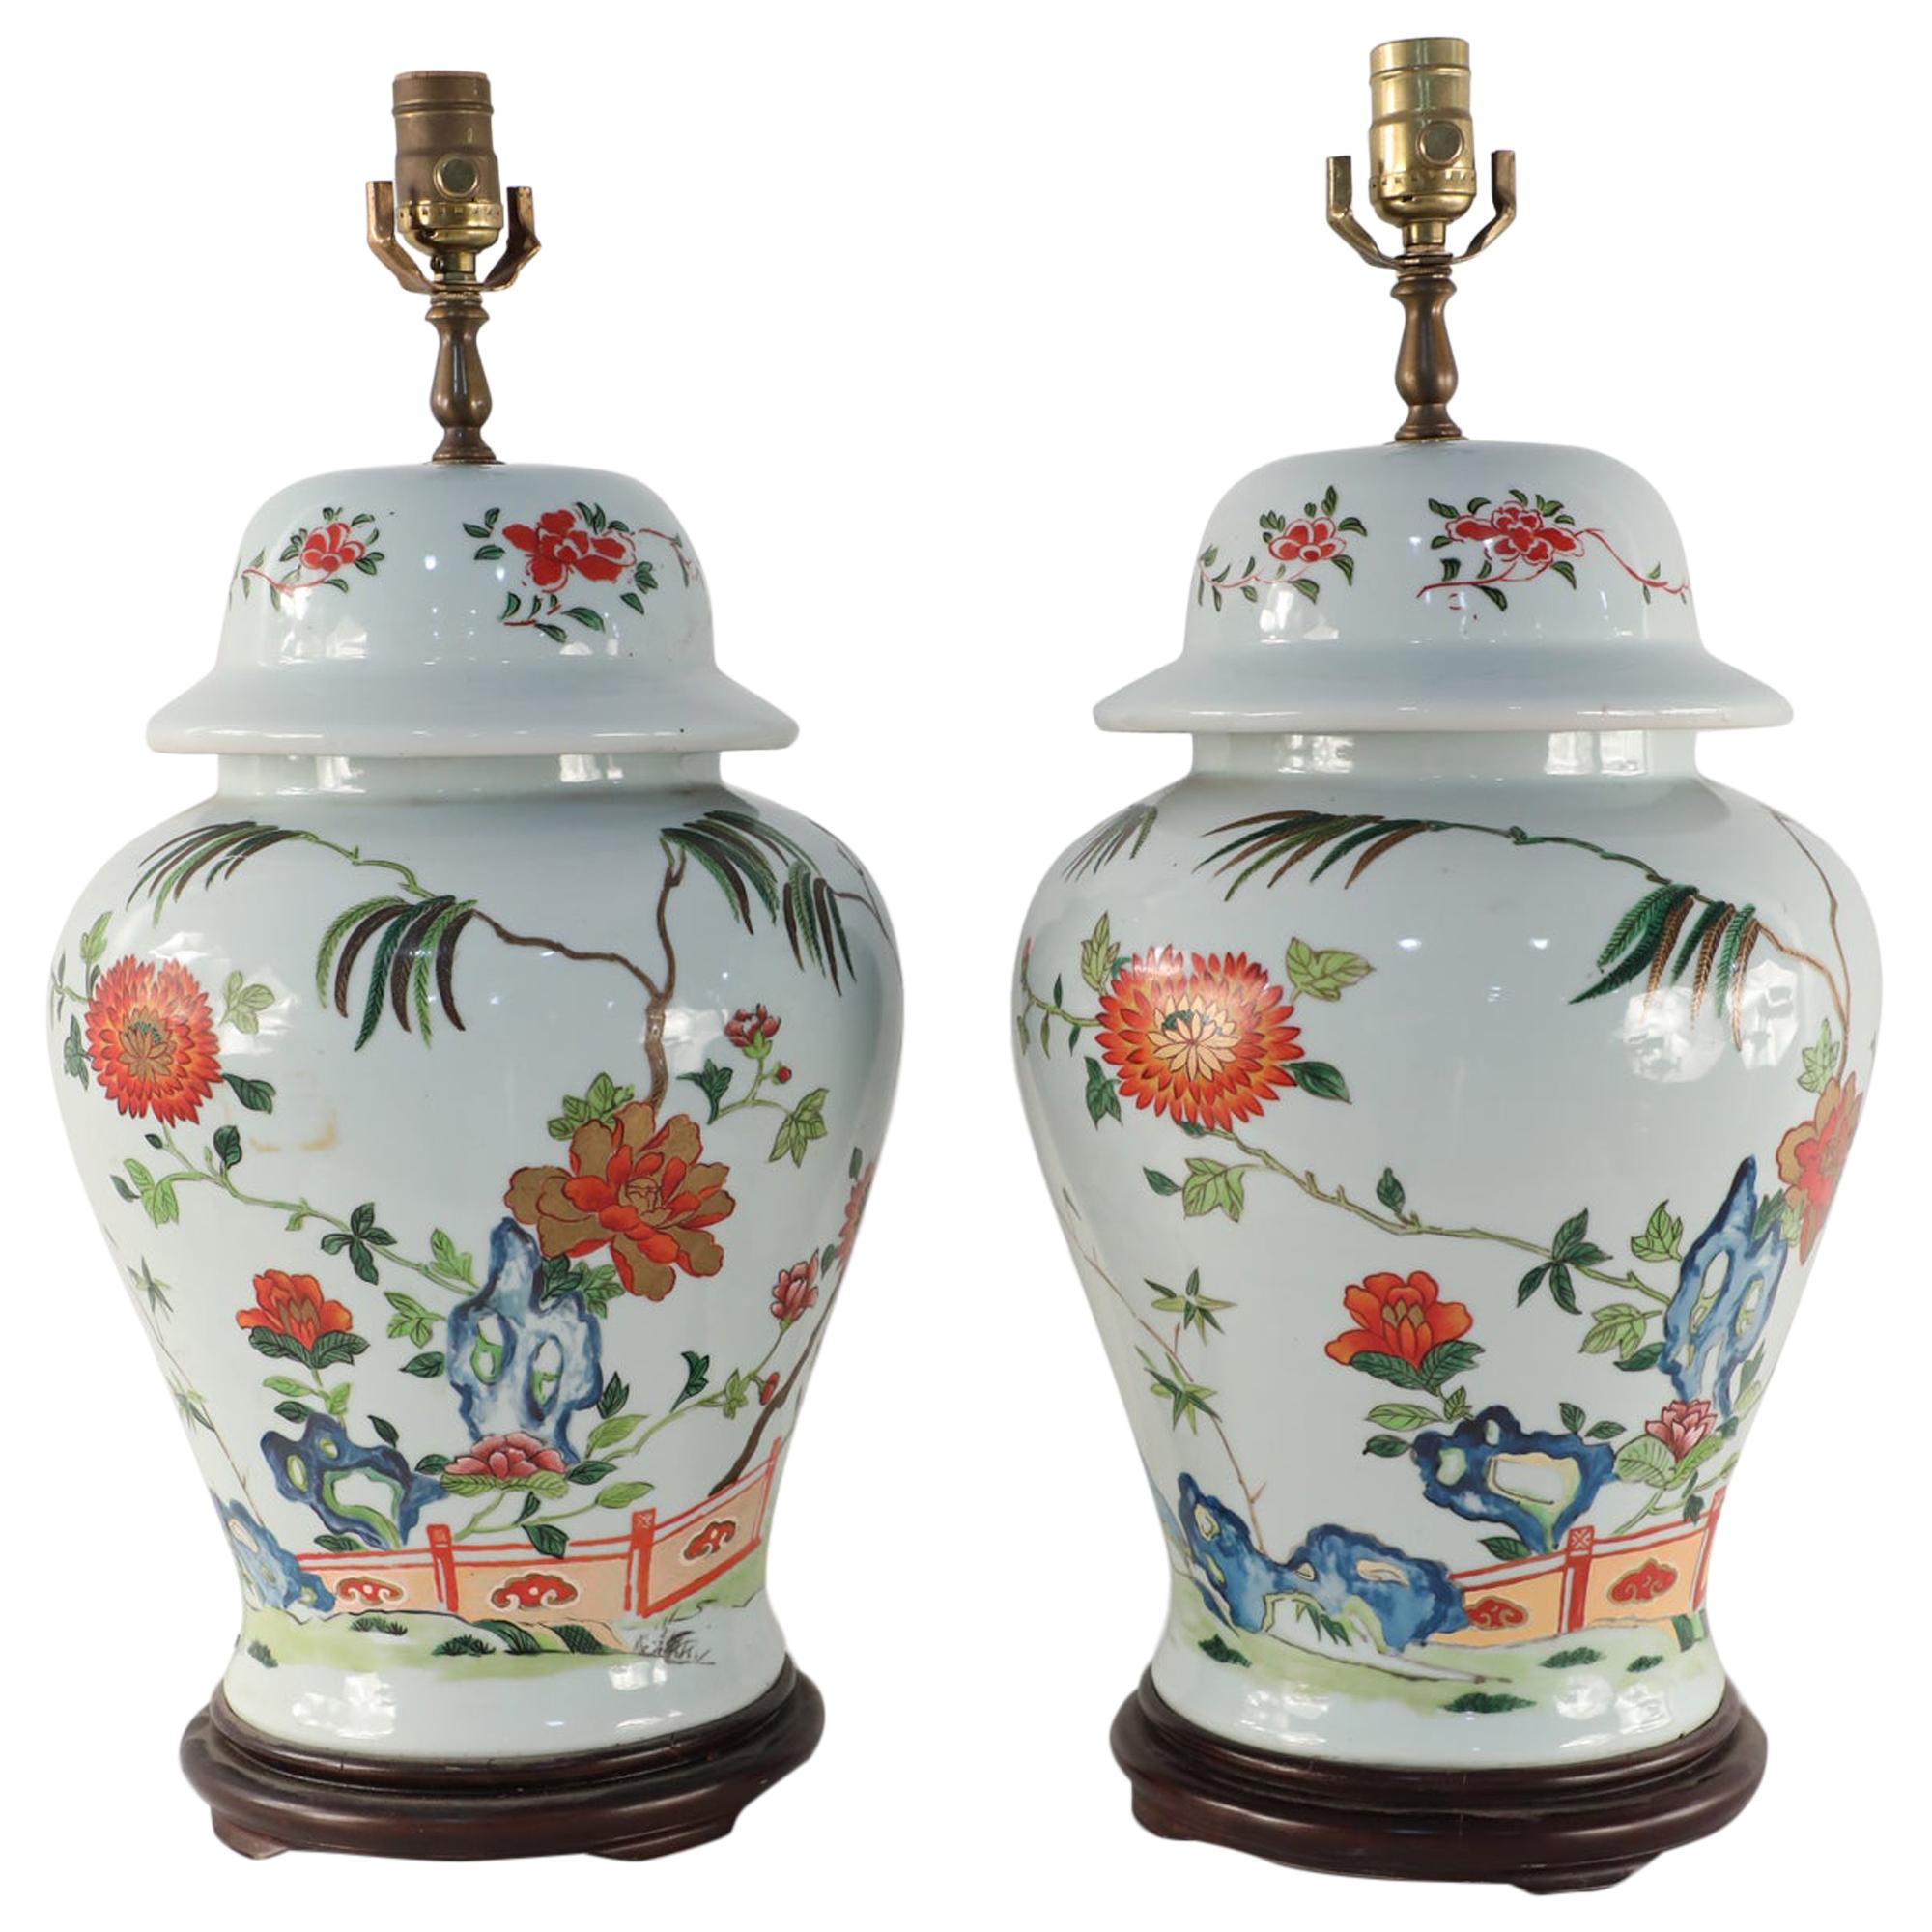 Pair of Chinese Off-White Floral Porcelain Urn Table Lamps Mounted on Wood Base